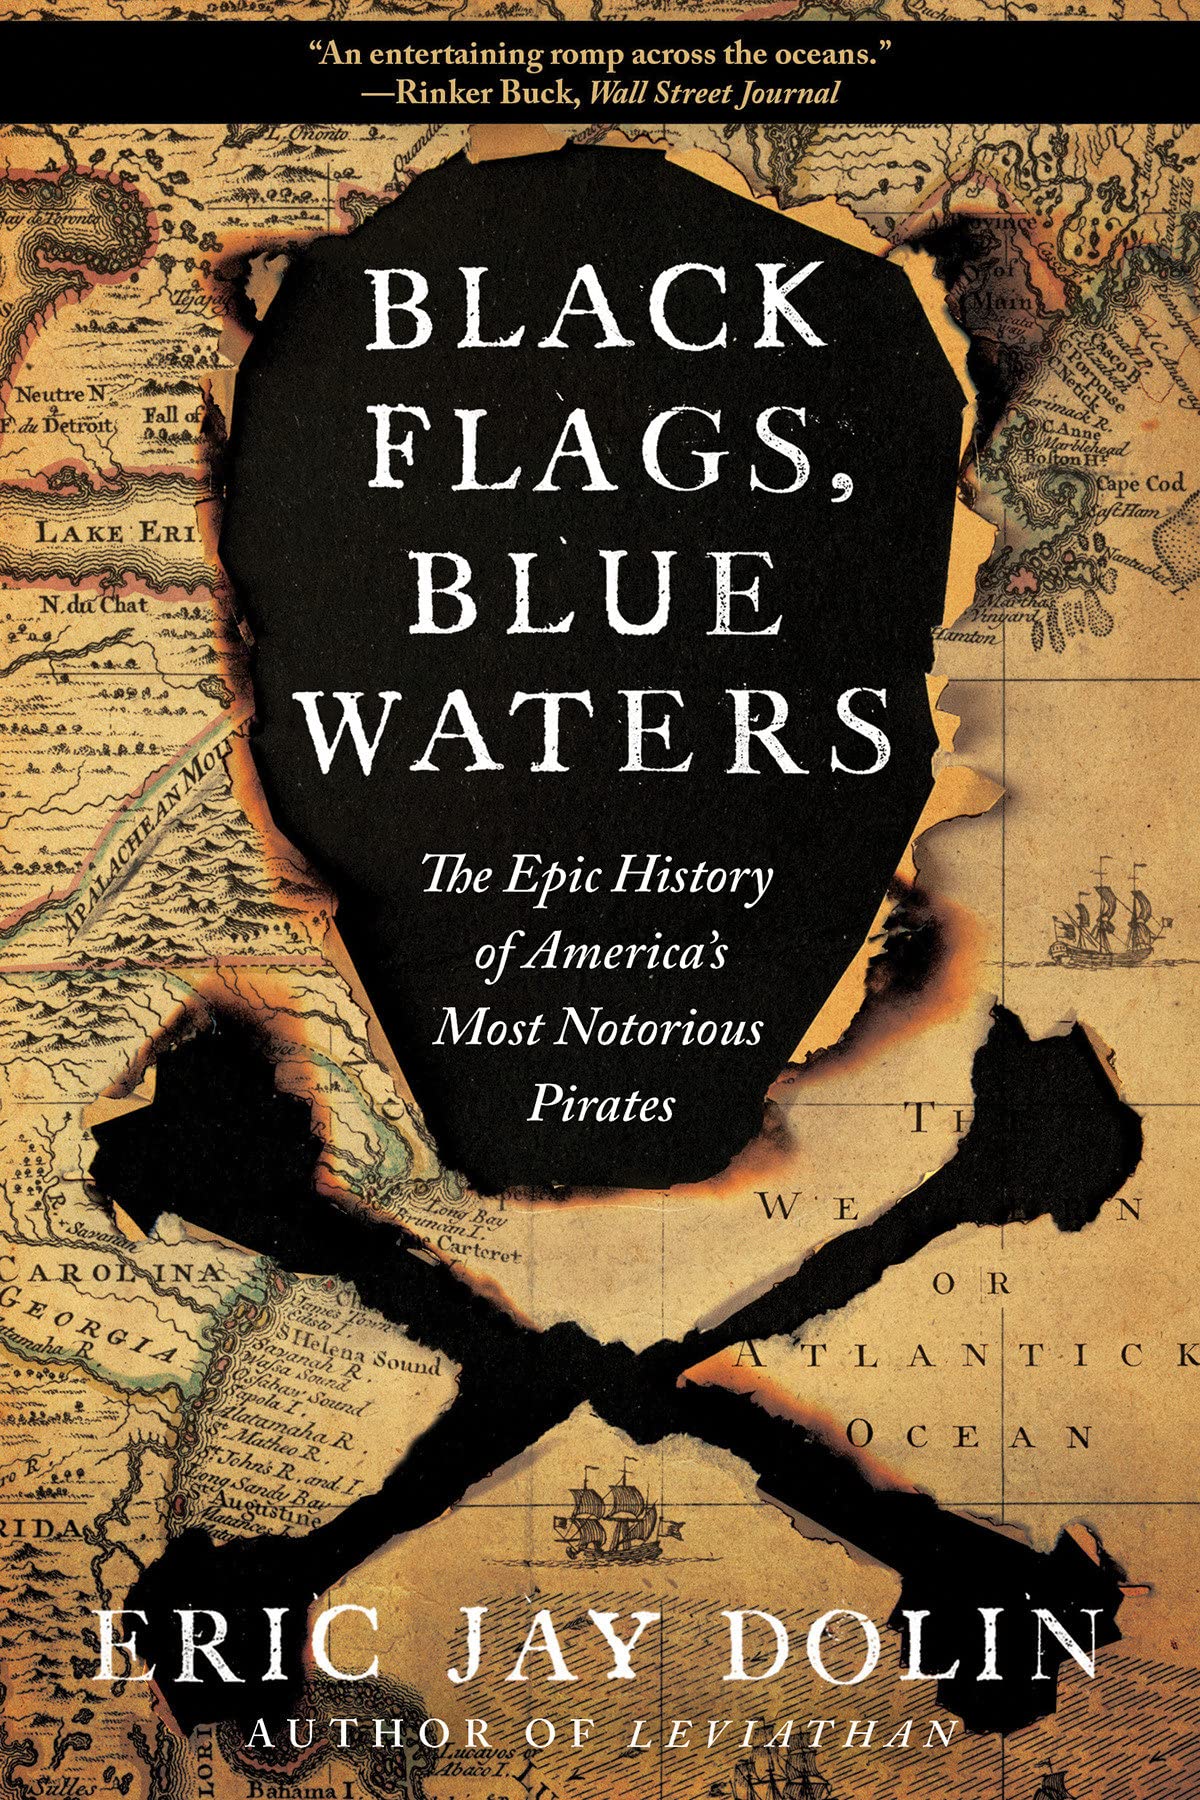 Cover of Black Flags, Blue Waters by Eric Jay Dolin; old pirate map background and black skull and crossbones over it